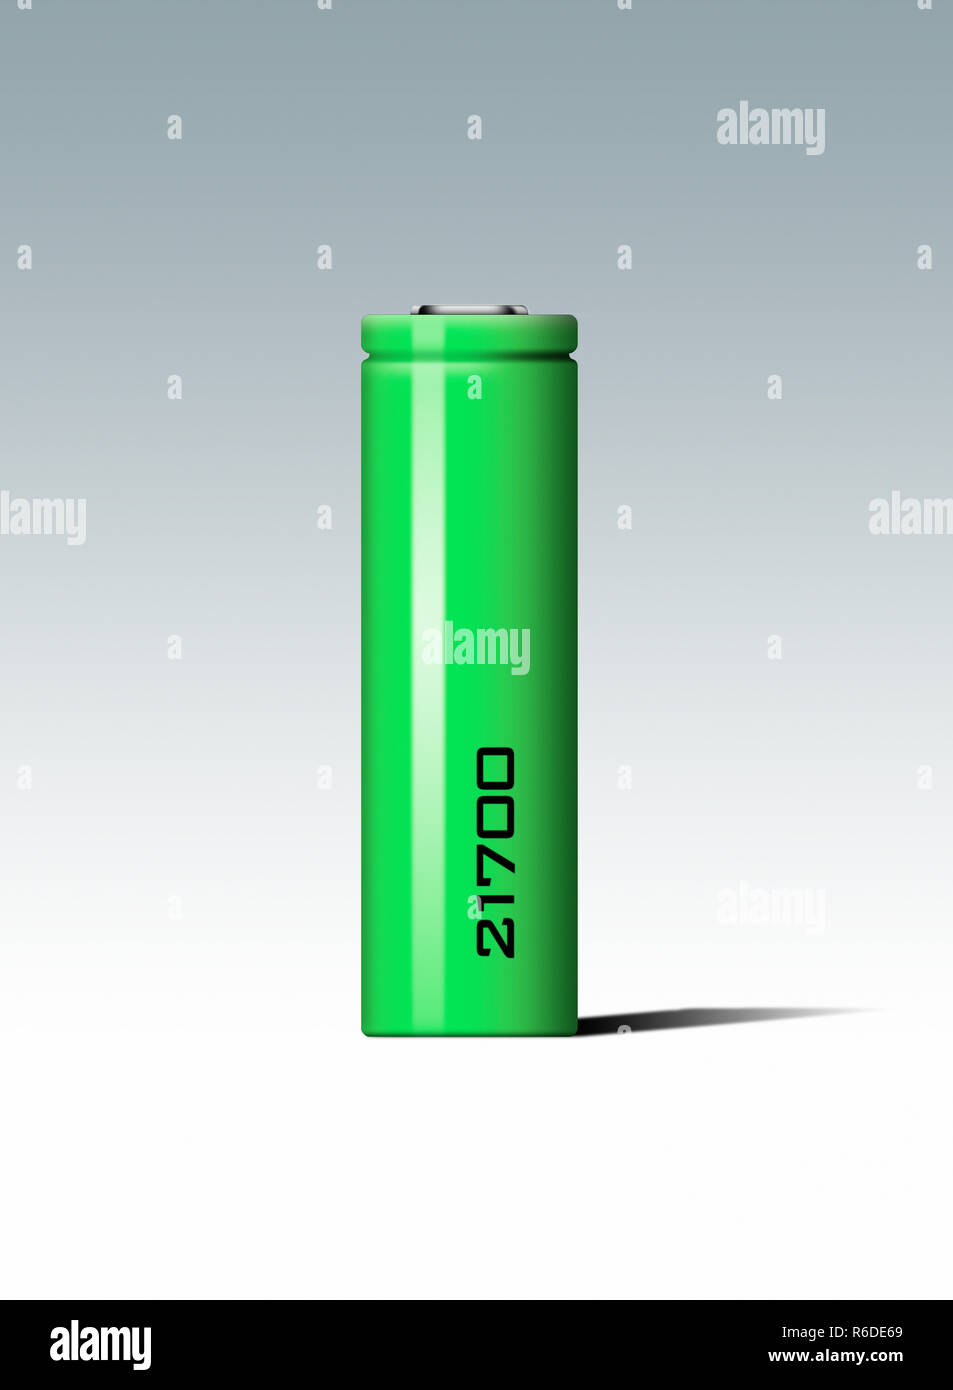 Green lithium style battery against a white background Stock Photo